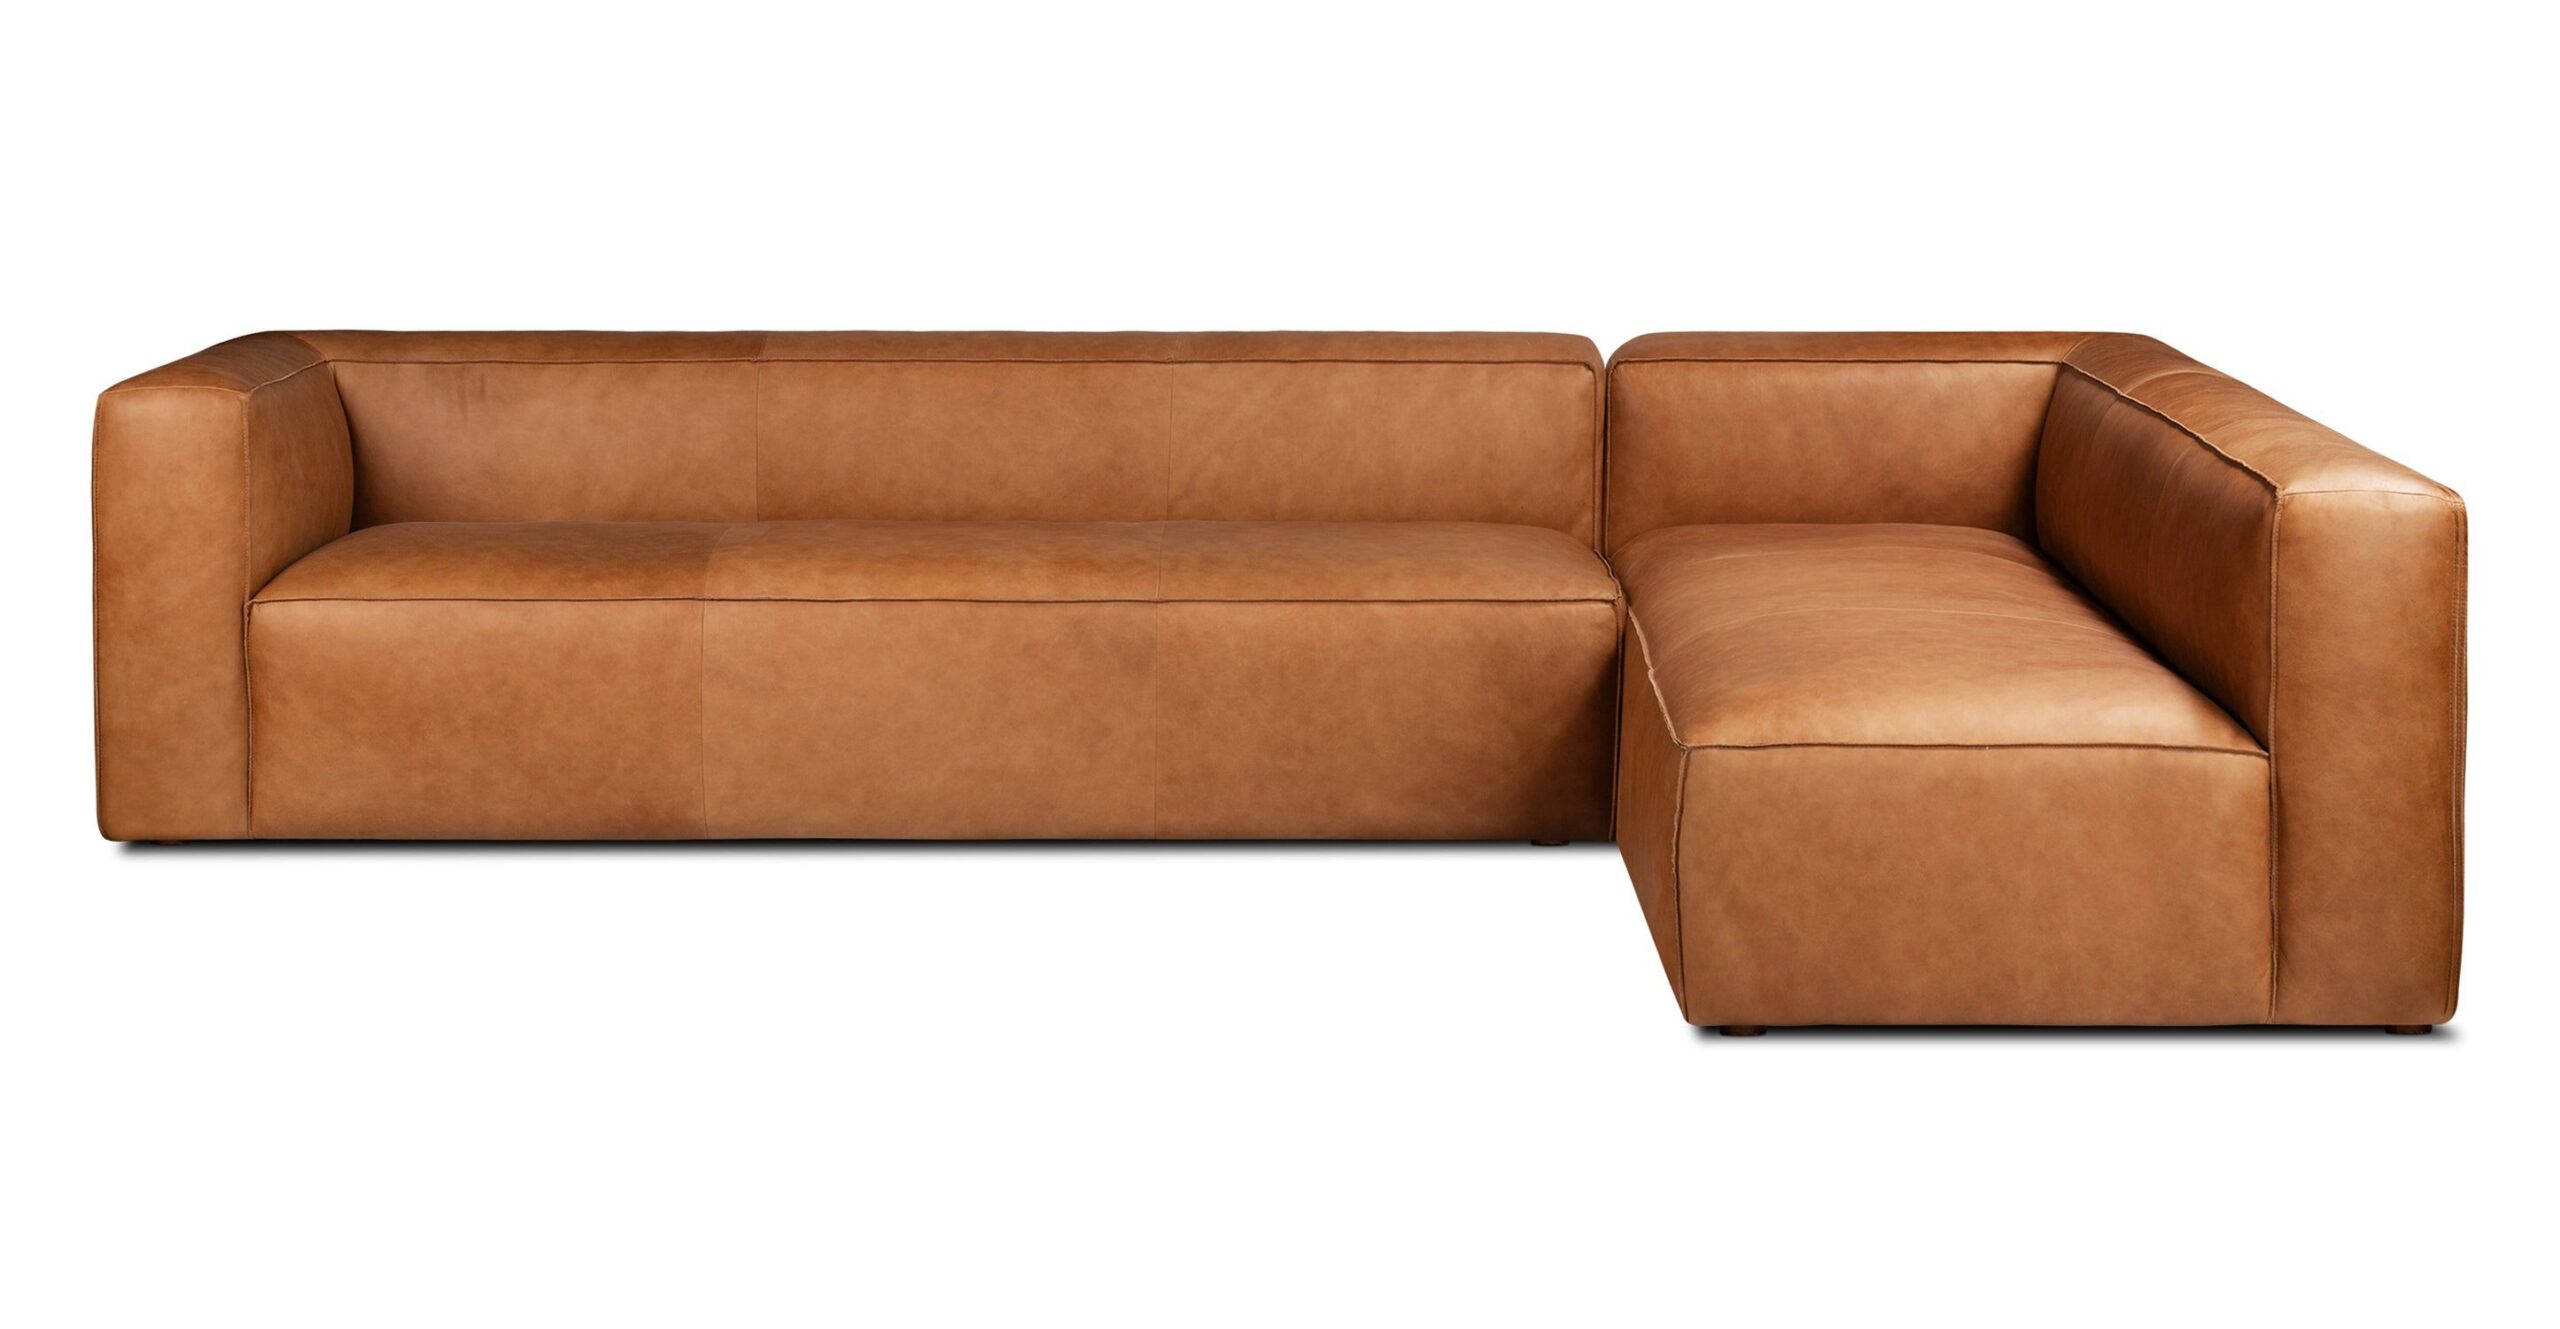 Maximizing Space with a Corner Sectional
Sofa